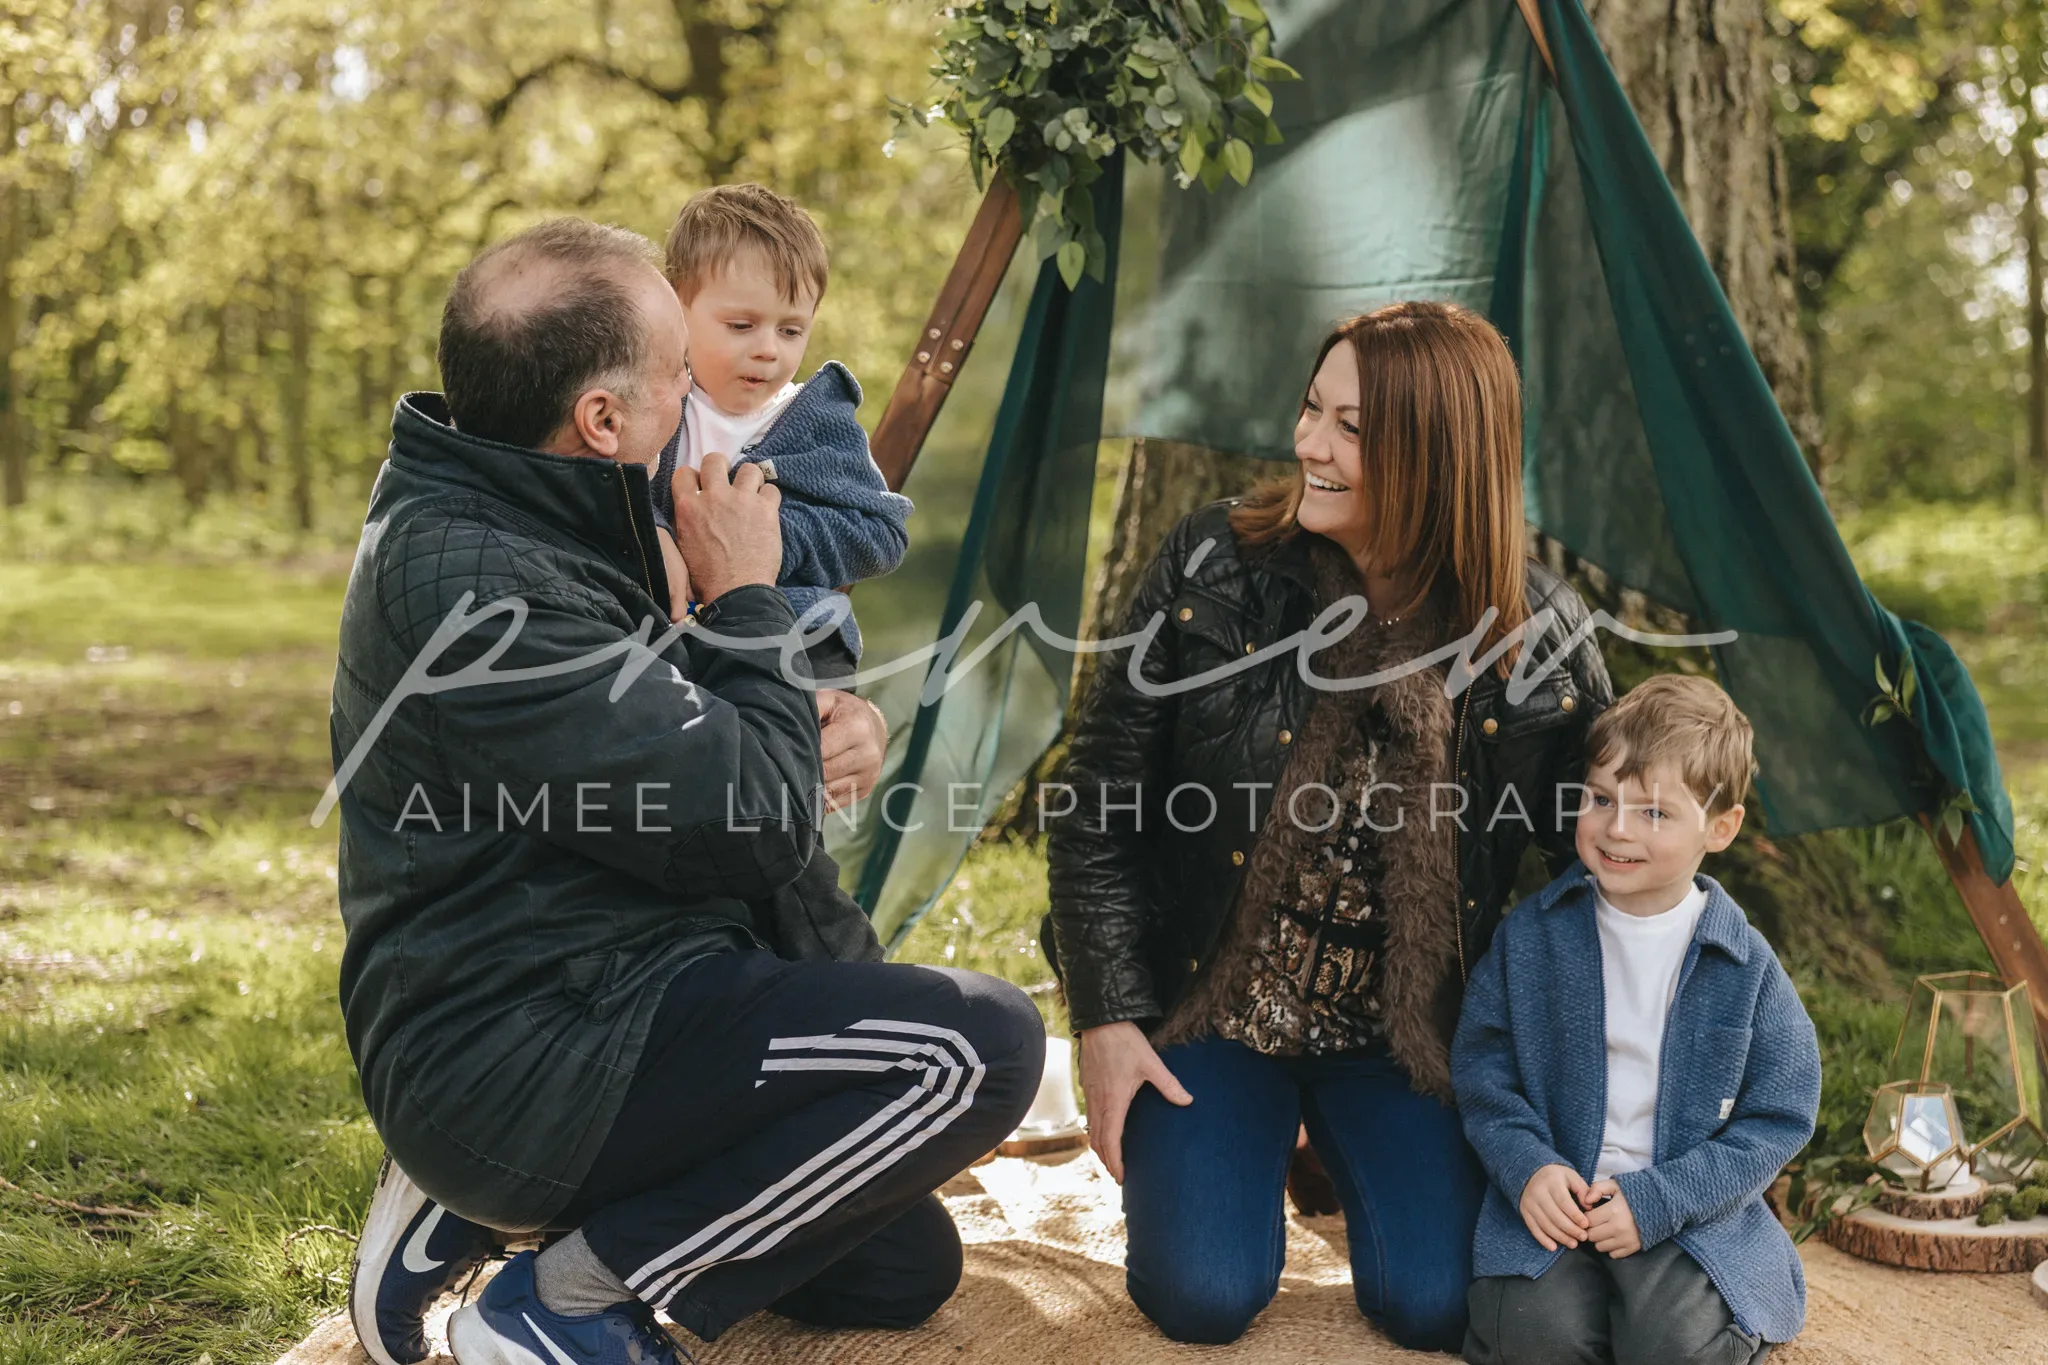 A family outdoors, with a father lifting a toddler, mother looking on smiling, and another young boy sitting beside them under a green teepee, in a sunlit wooded area.